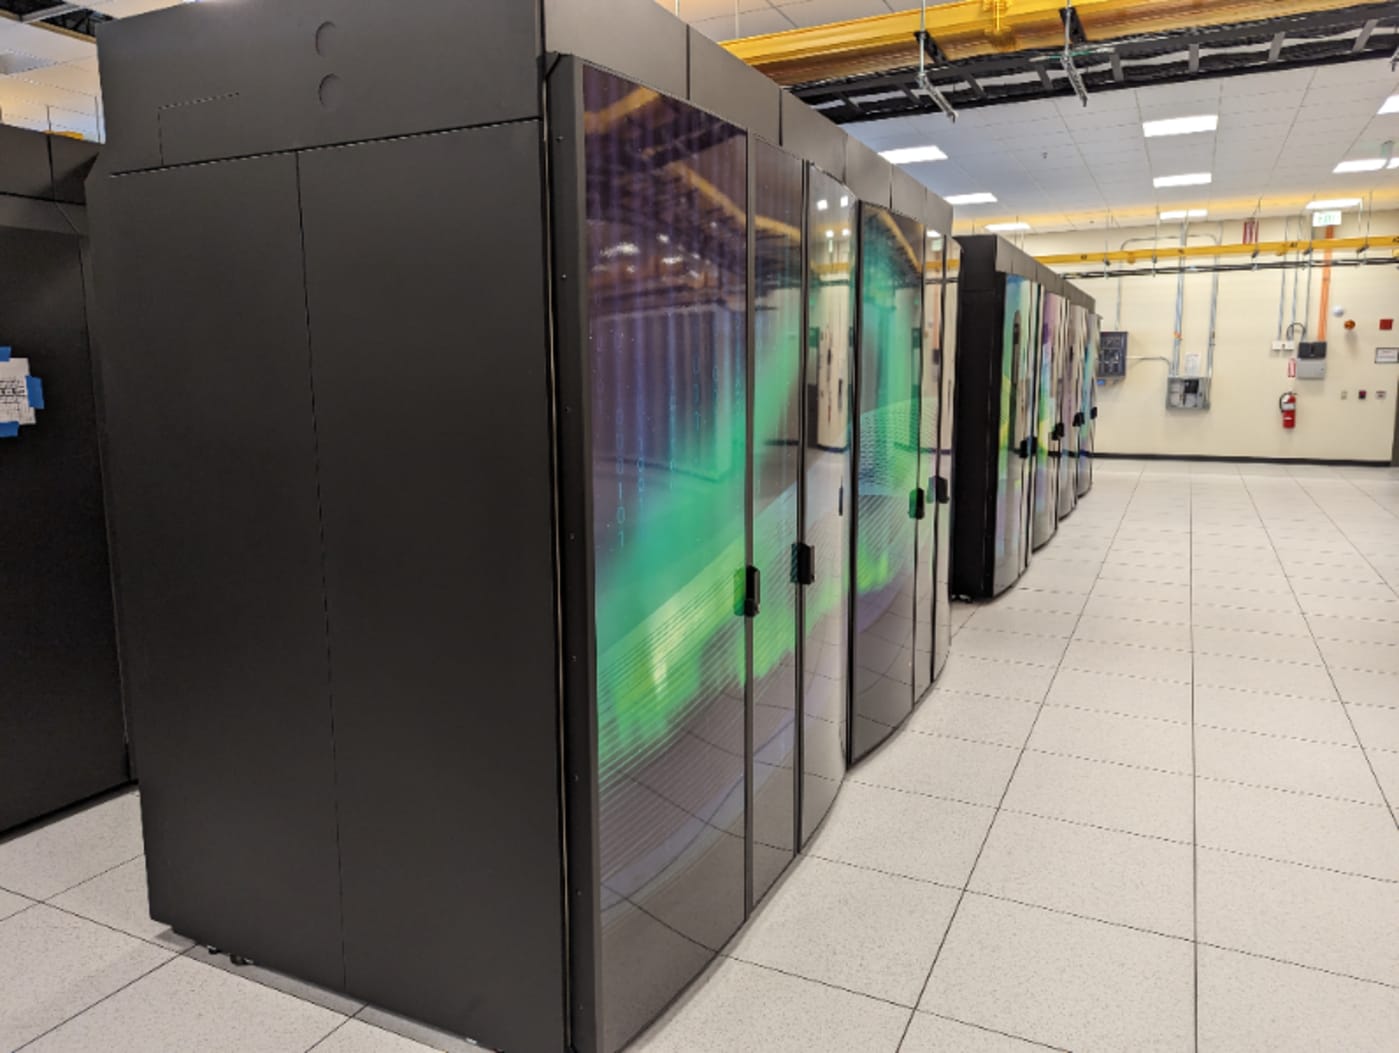 The Cheyenne supercomputer is currently being sold at auction for a fraction of its list price.